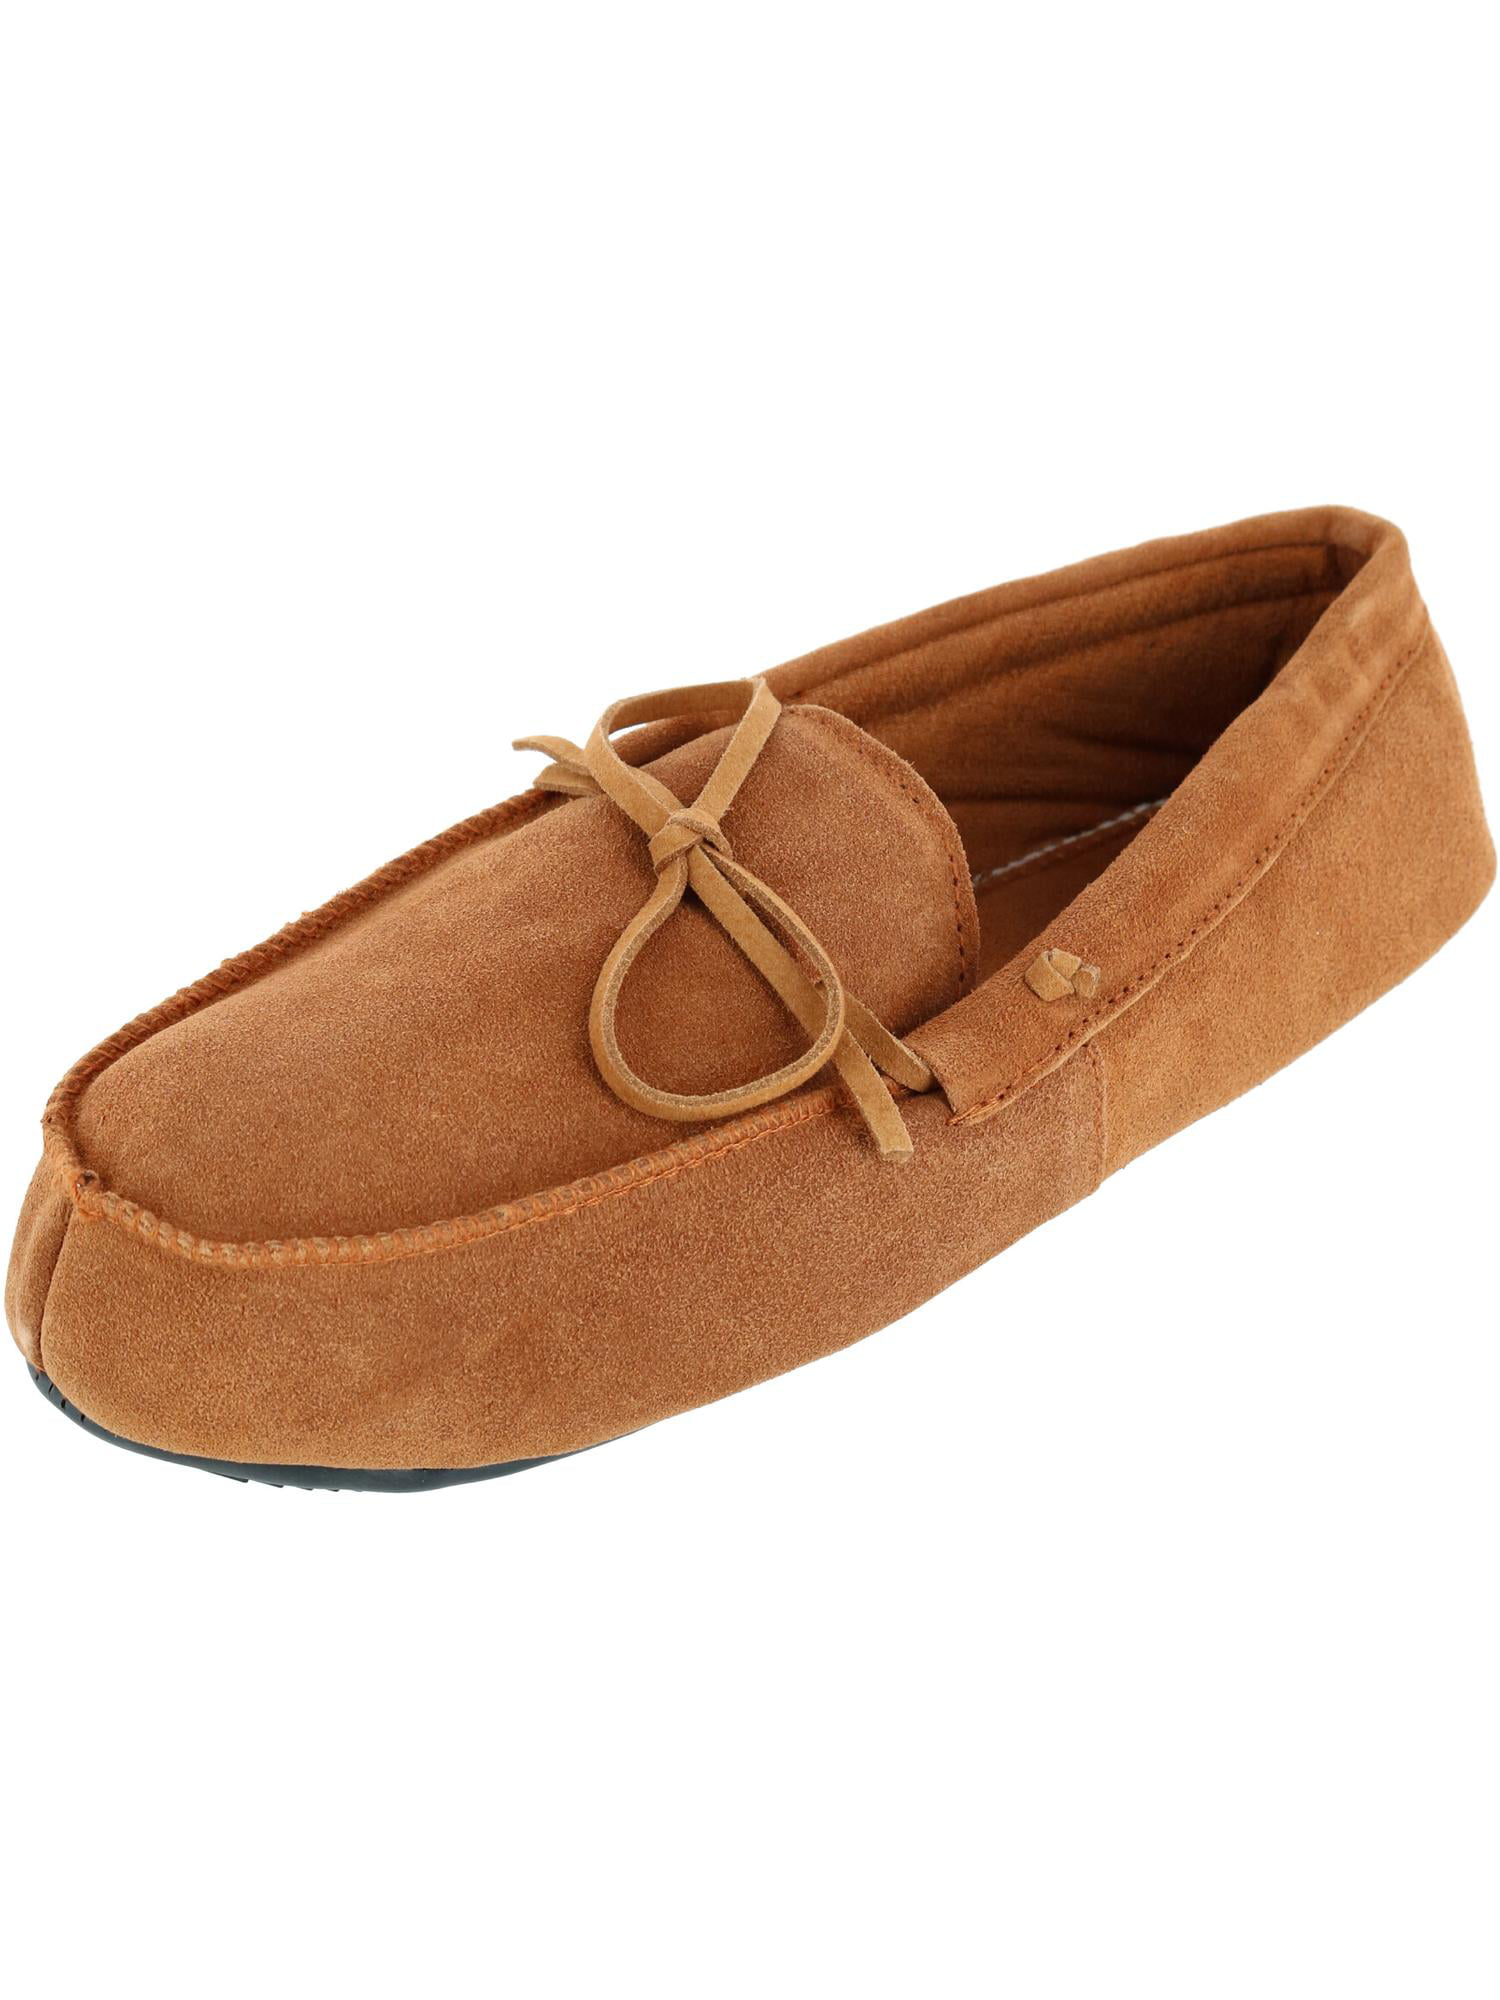 Mens Moccasin Slippers Brown Leather Suede Warm Lined Mokkers Sizes 6 to 14